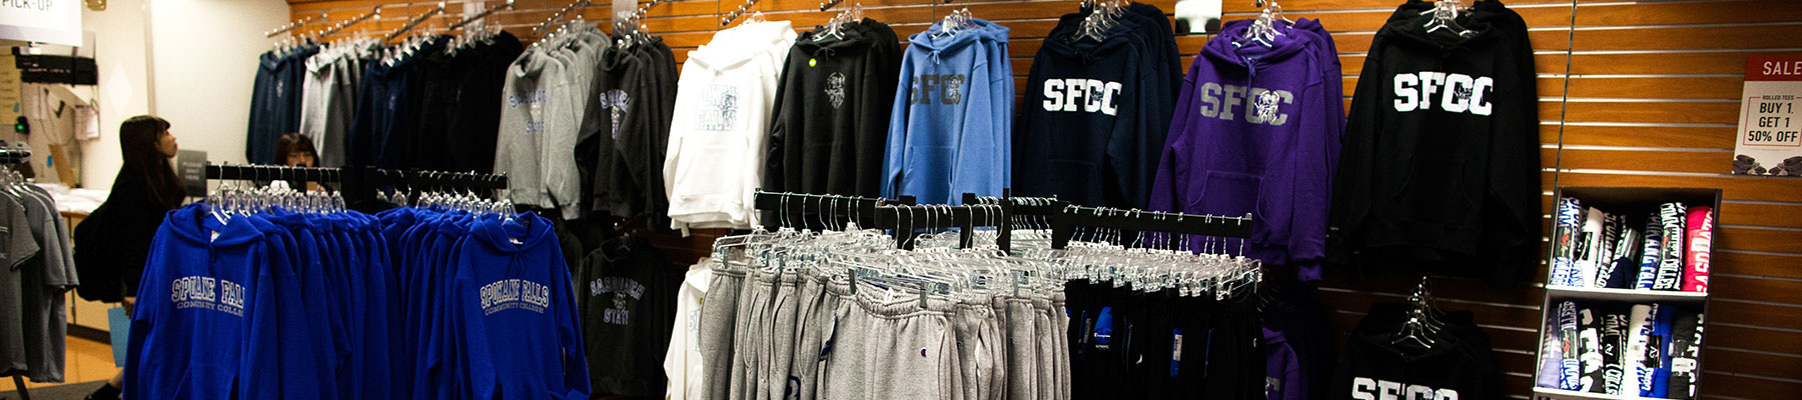 Racks of clothing in the campus bookstore